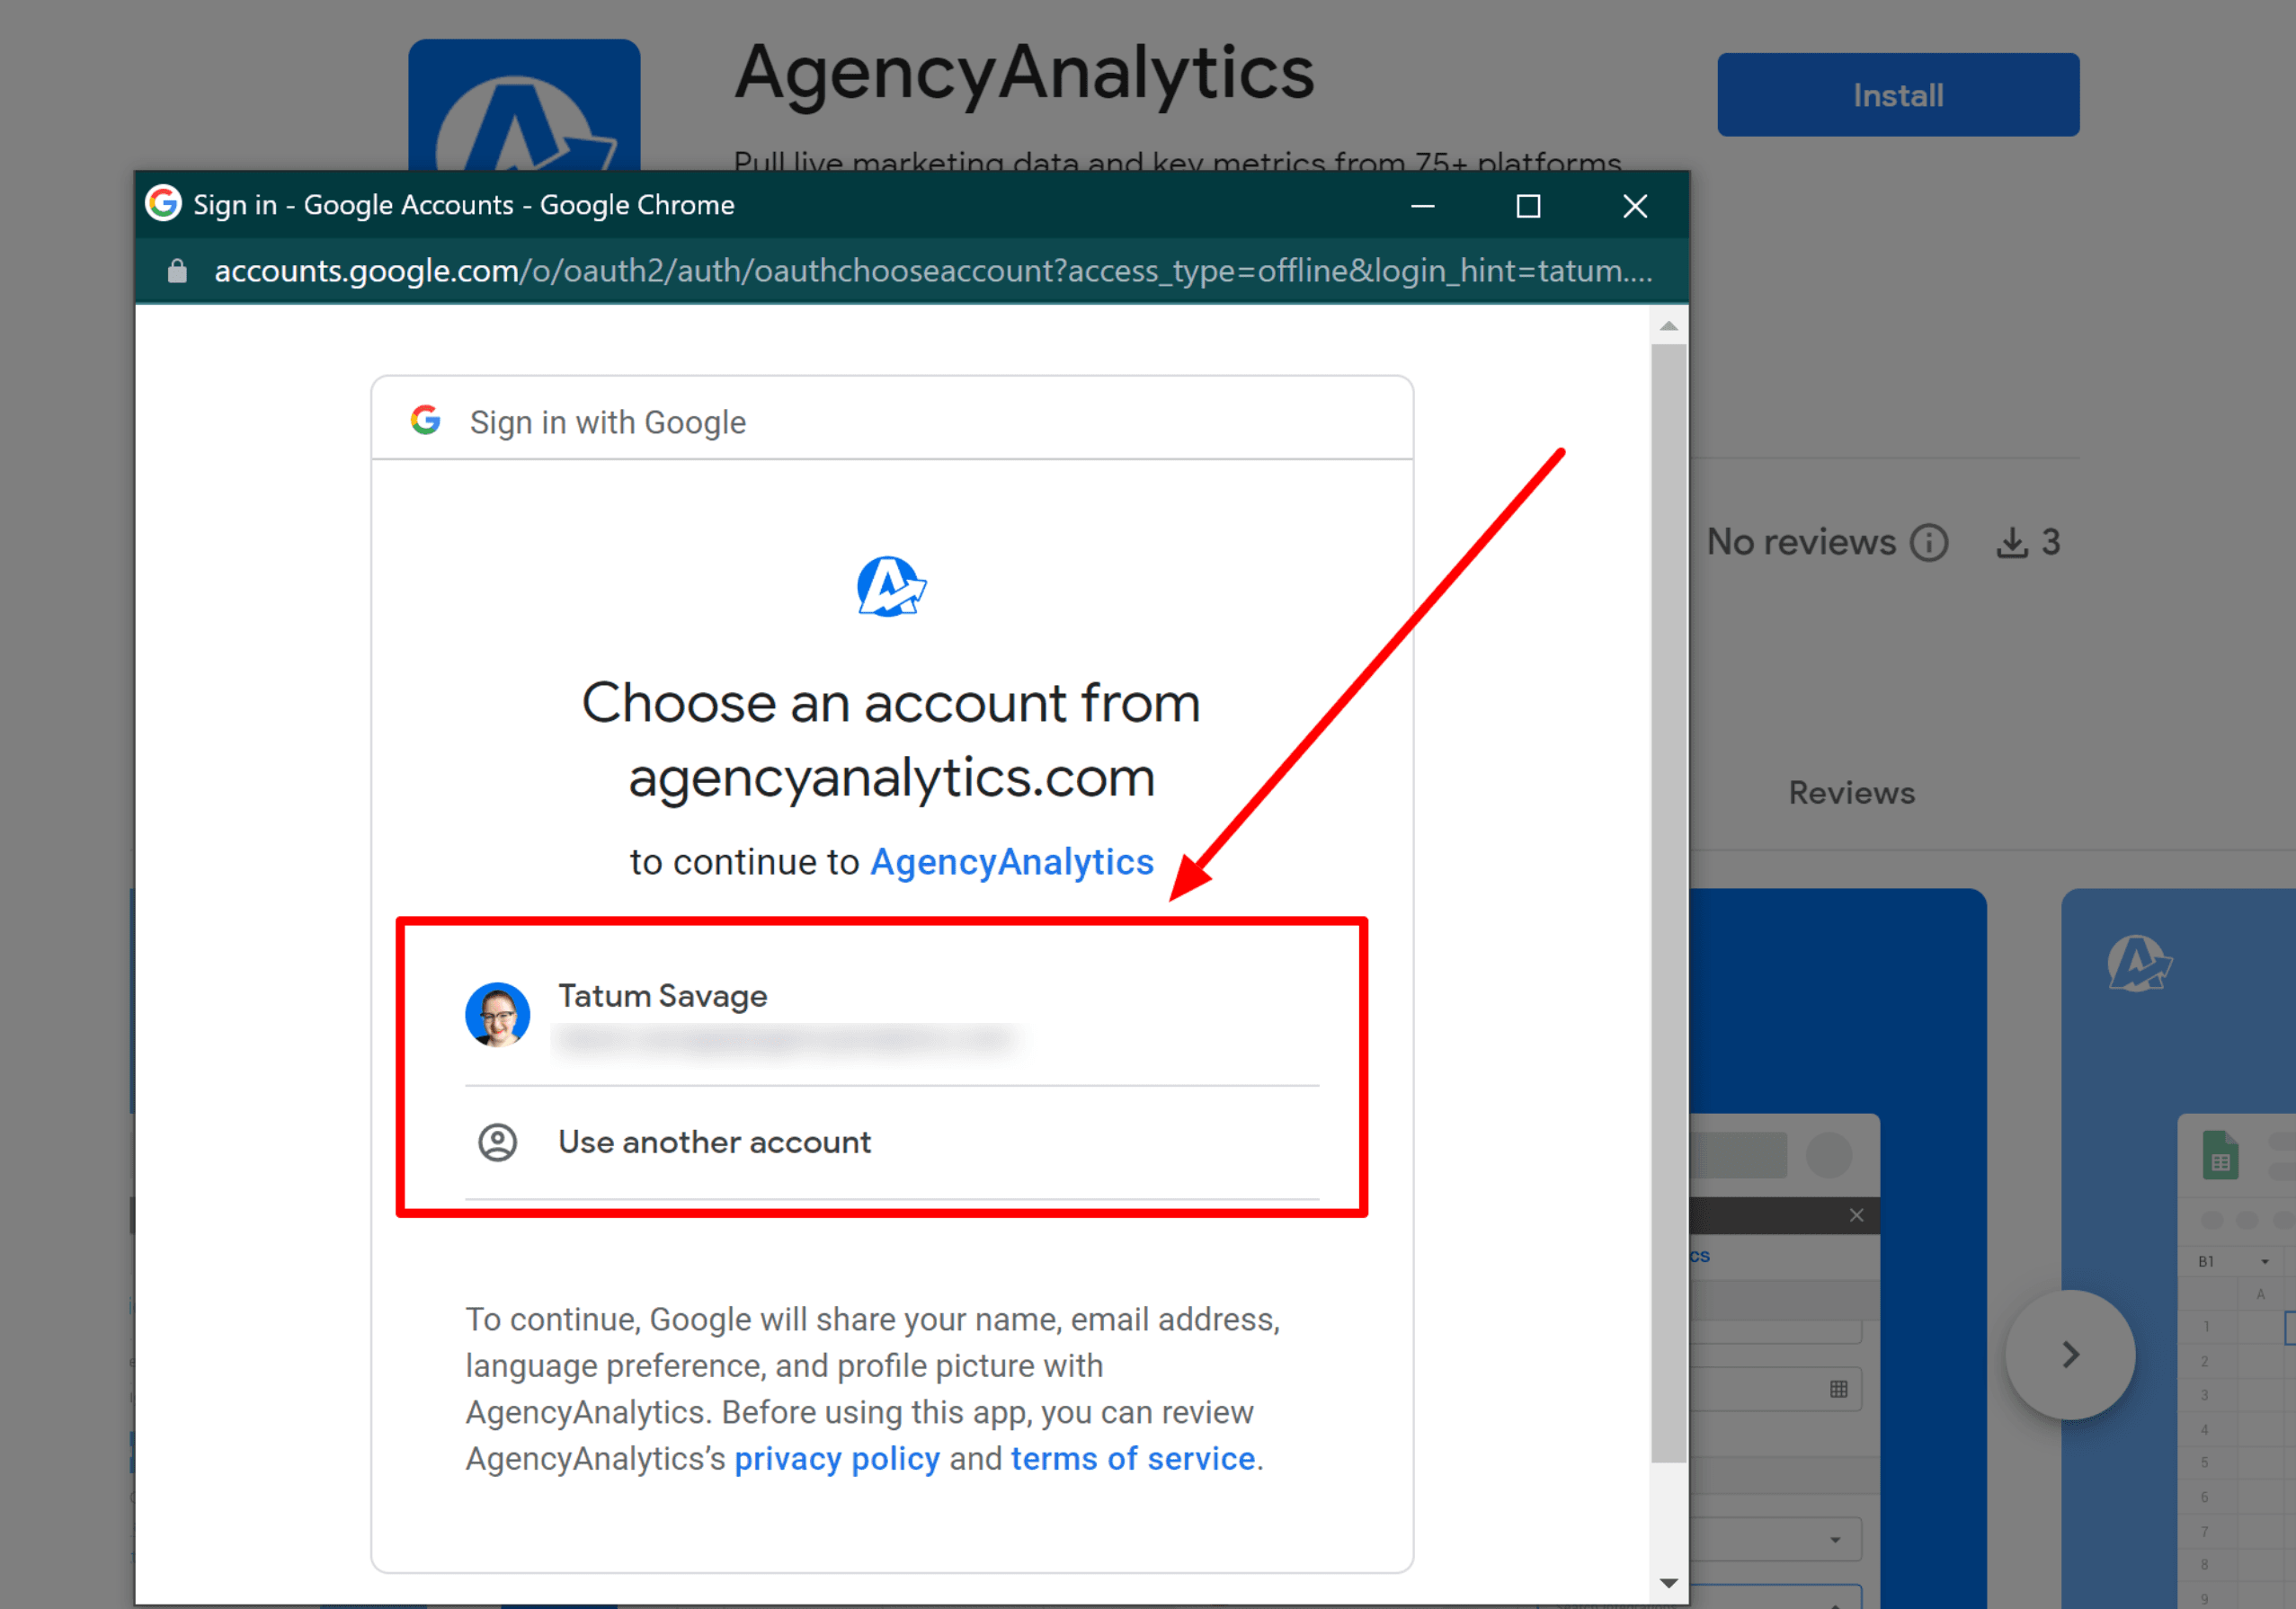 An image showing how to select your preferred Google account to install AgencyAnalytics for Google Sheets